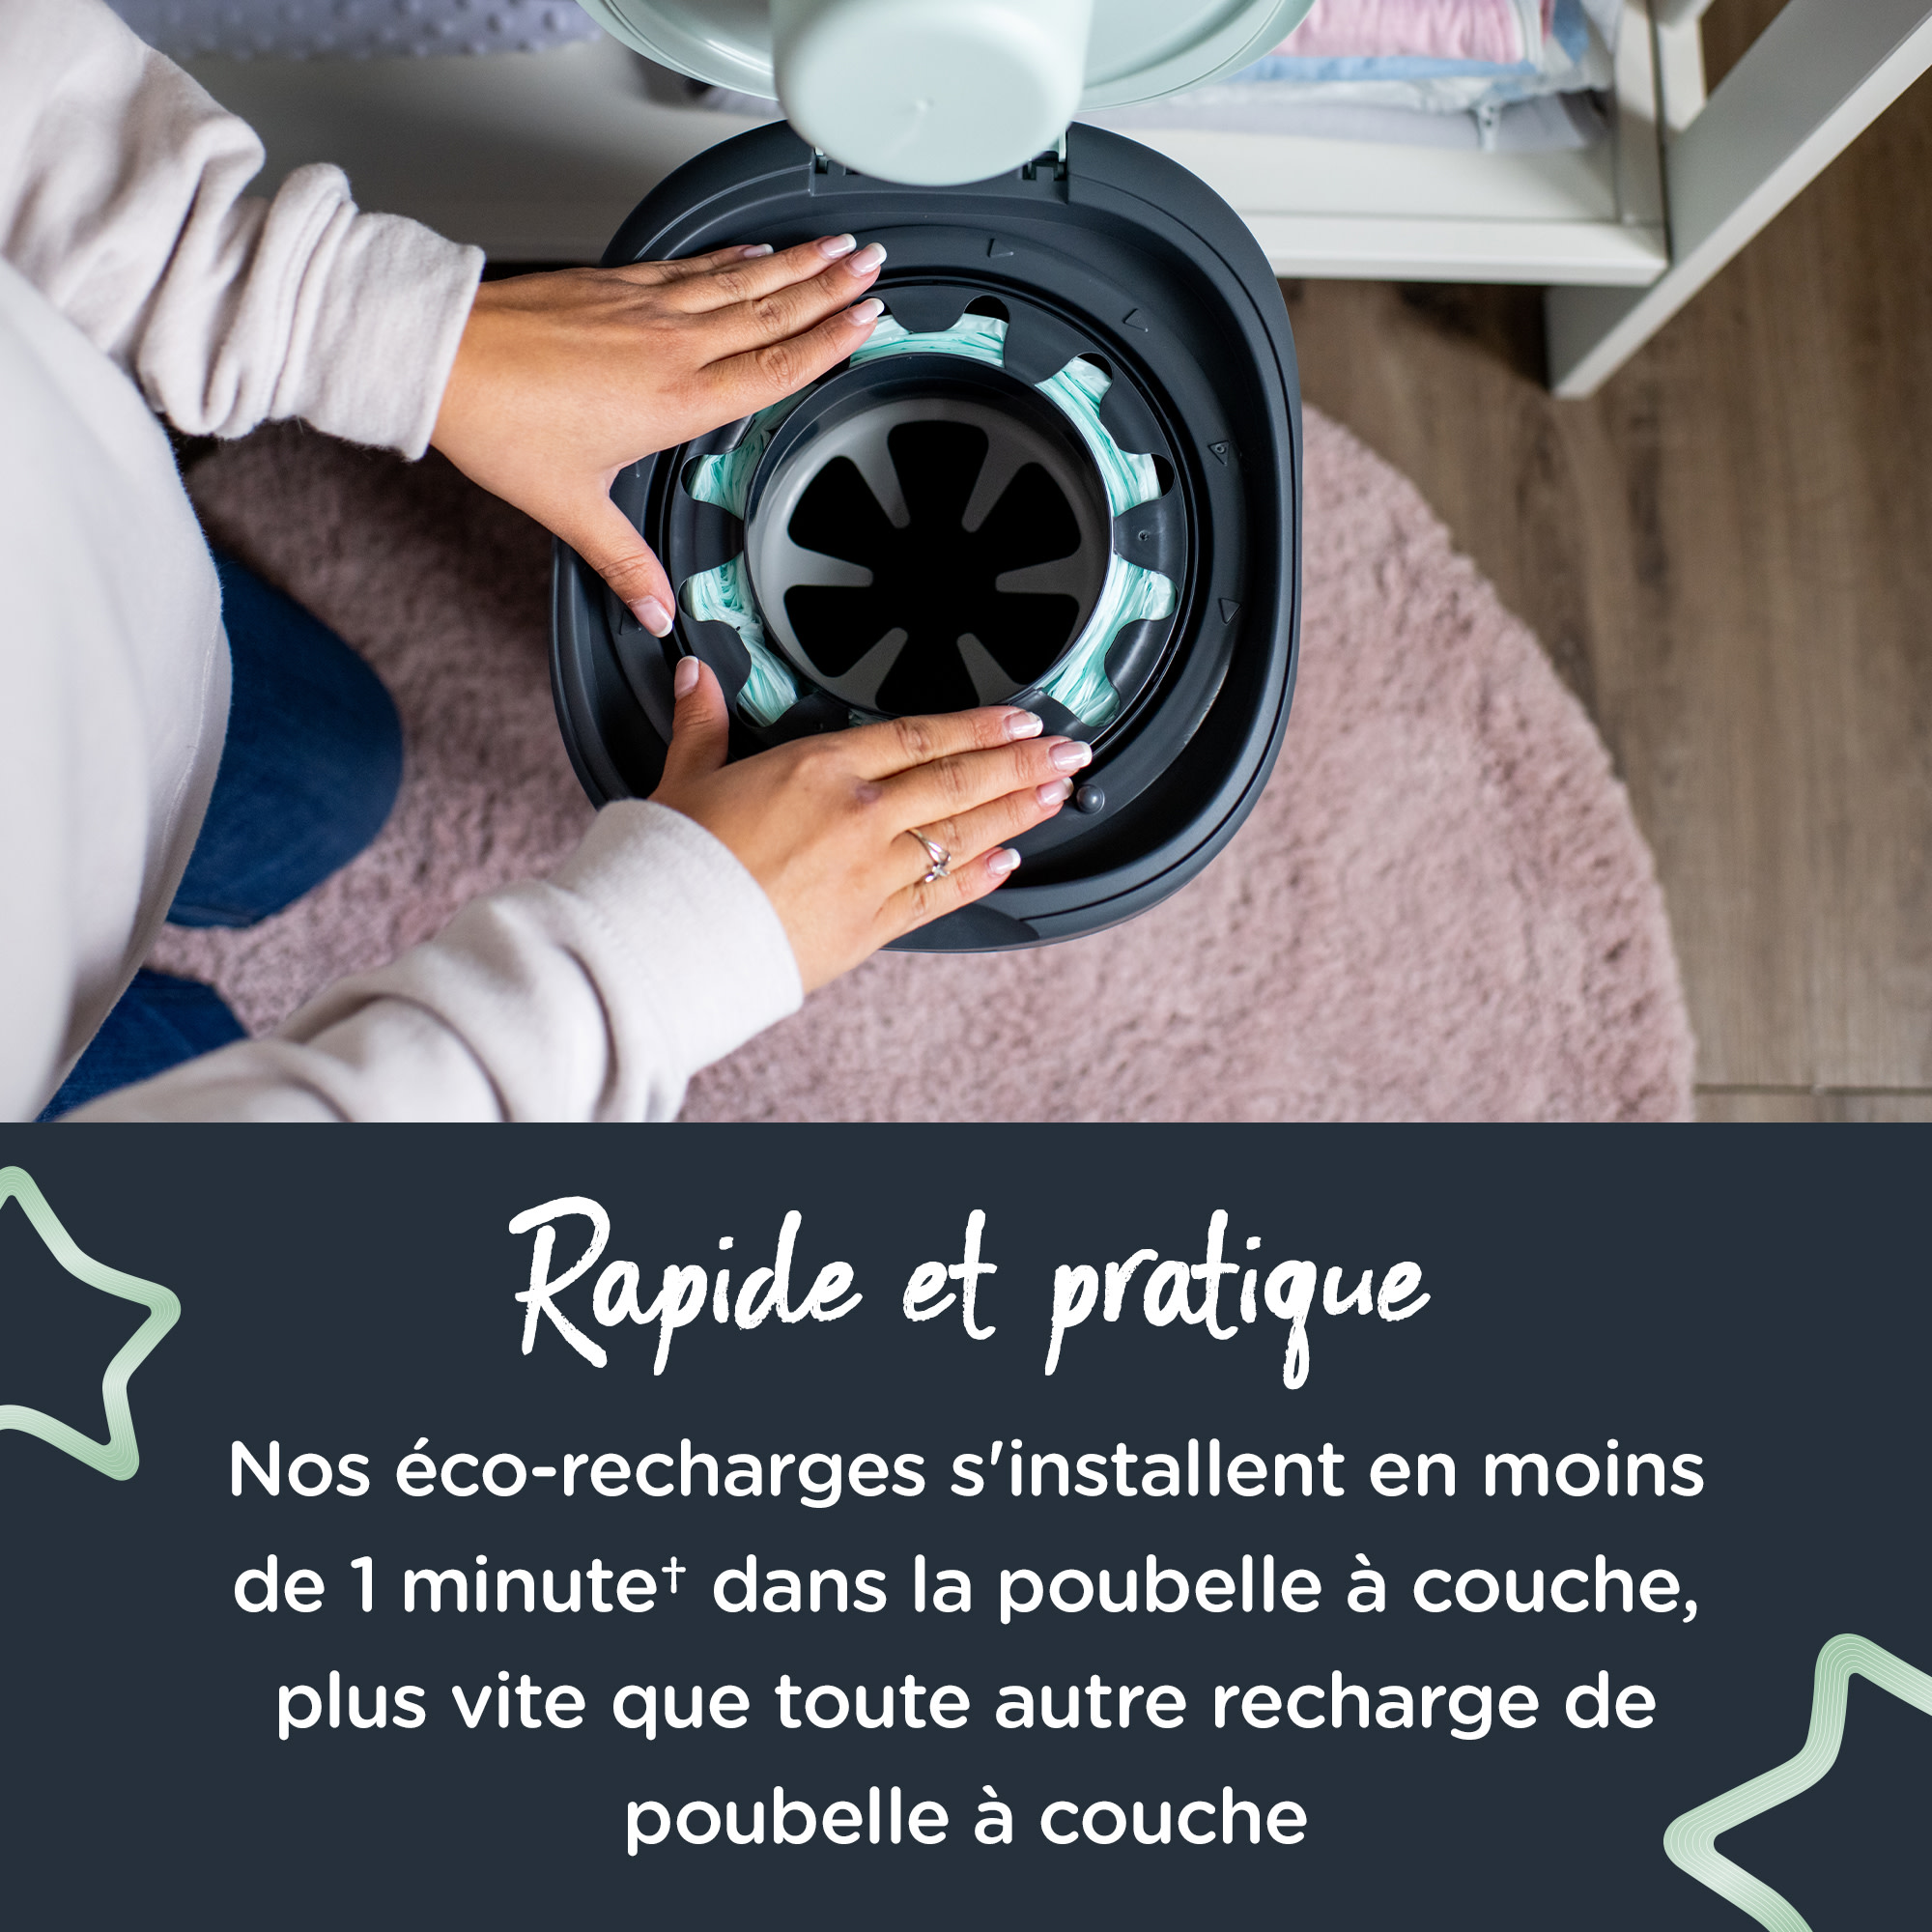 Tommee Tippee Twist & Click Blue poubelle à couches + recharge